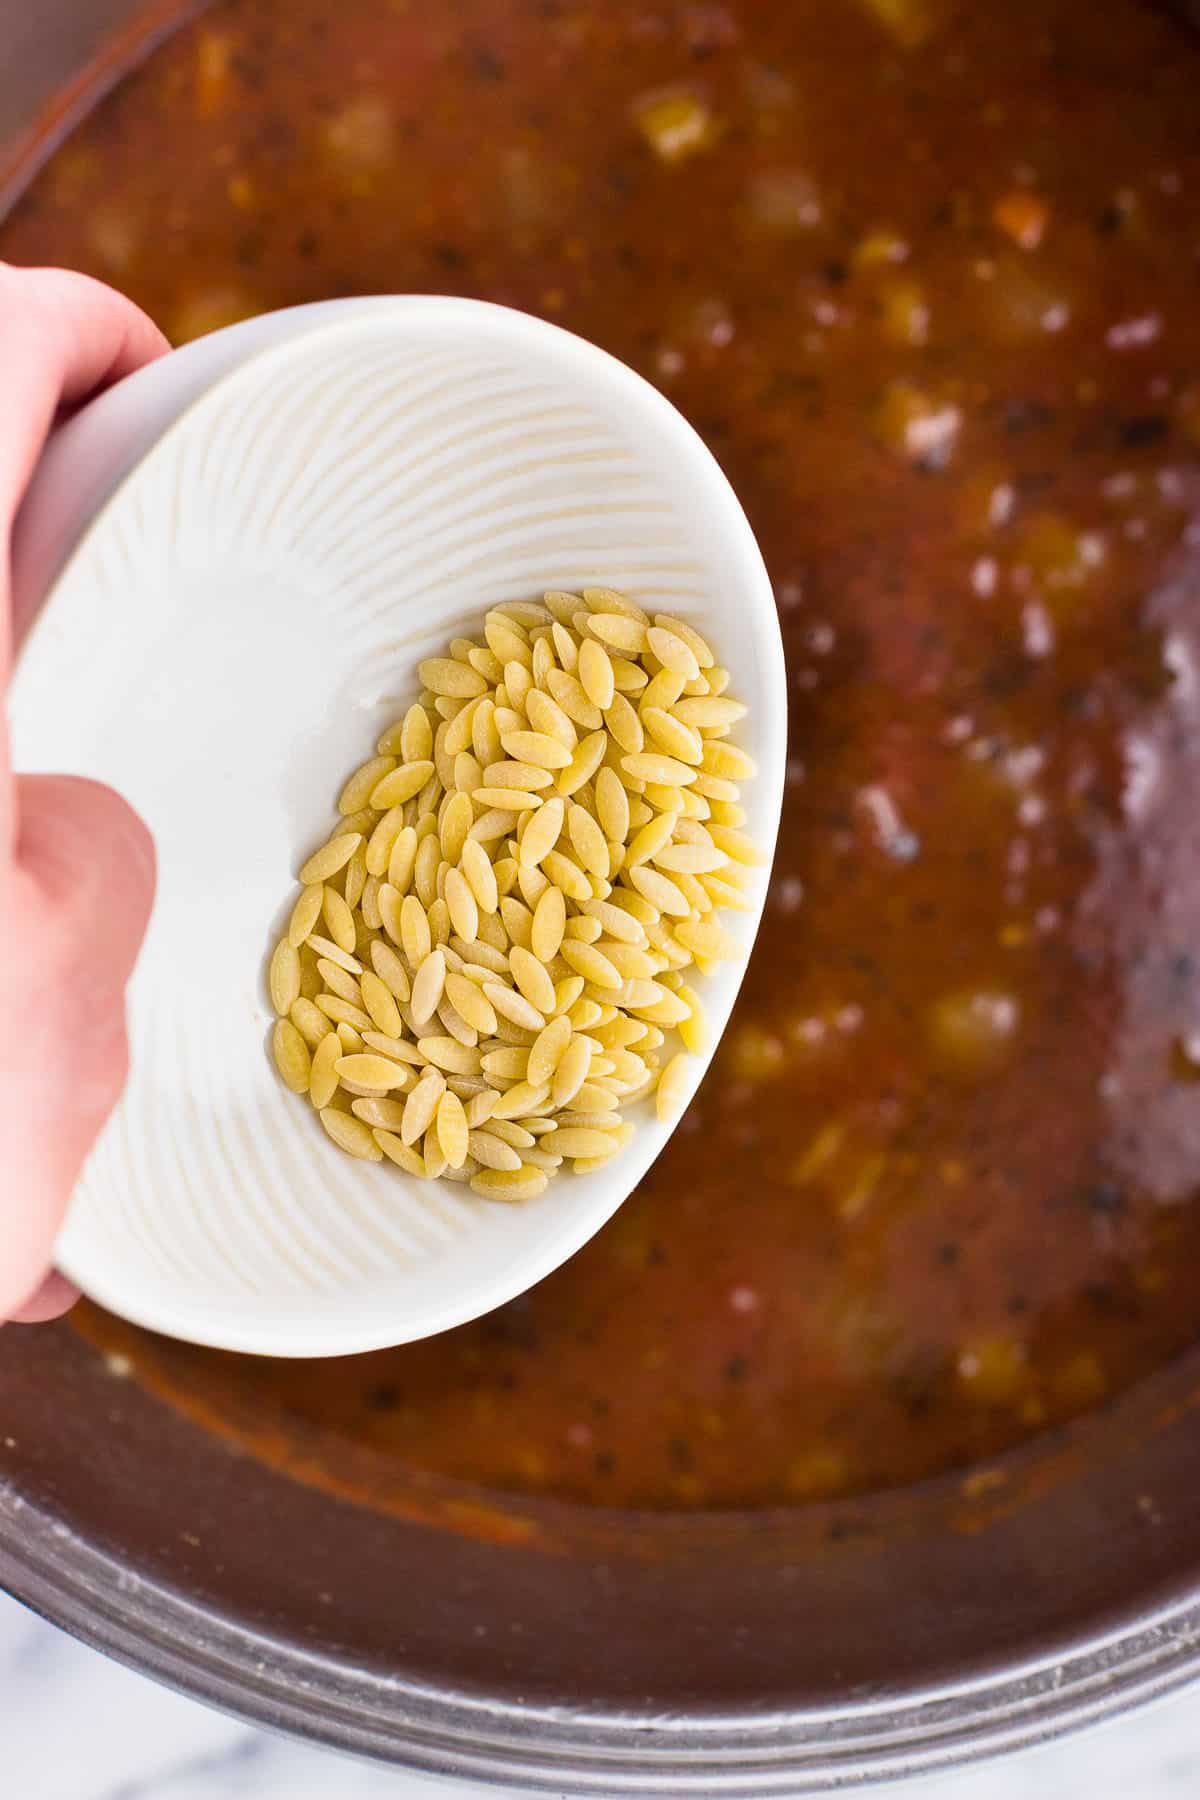 Orzo being poured into the bowl of soup.